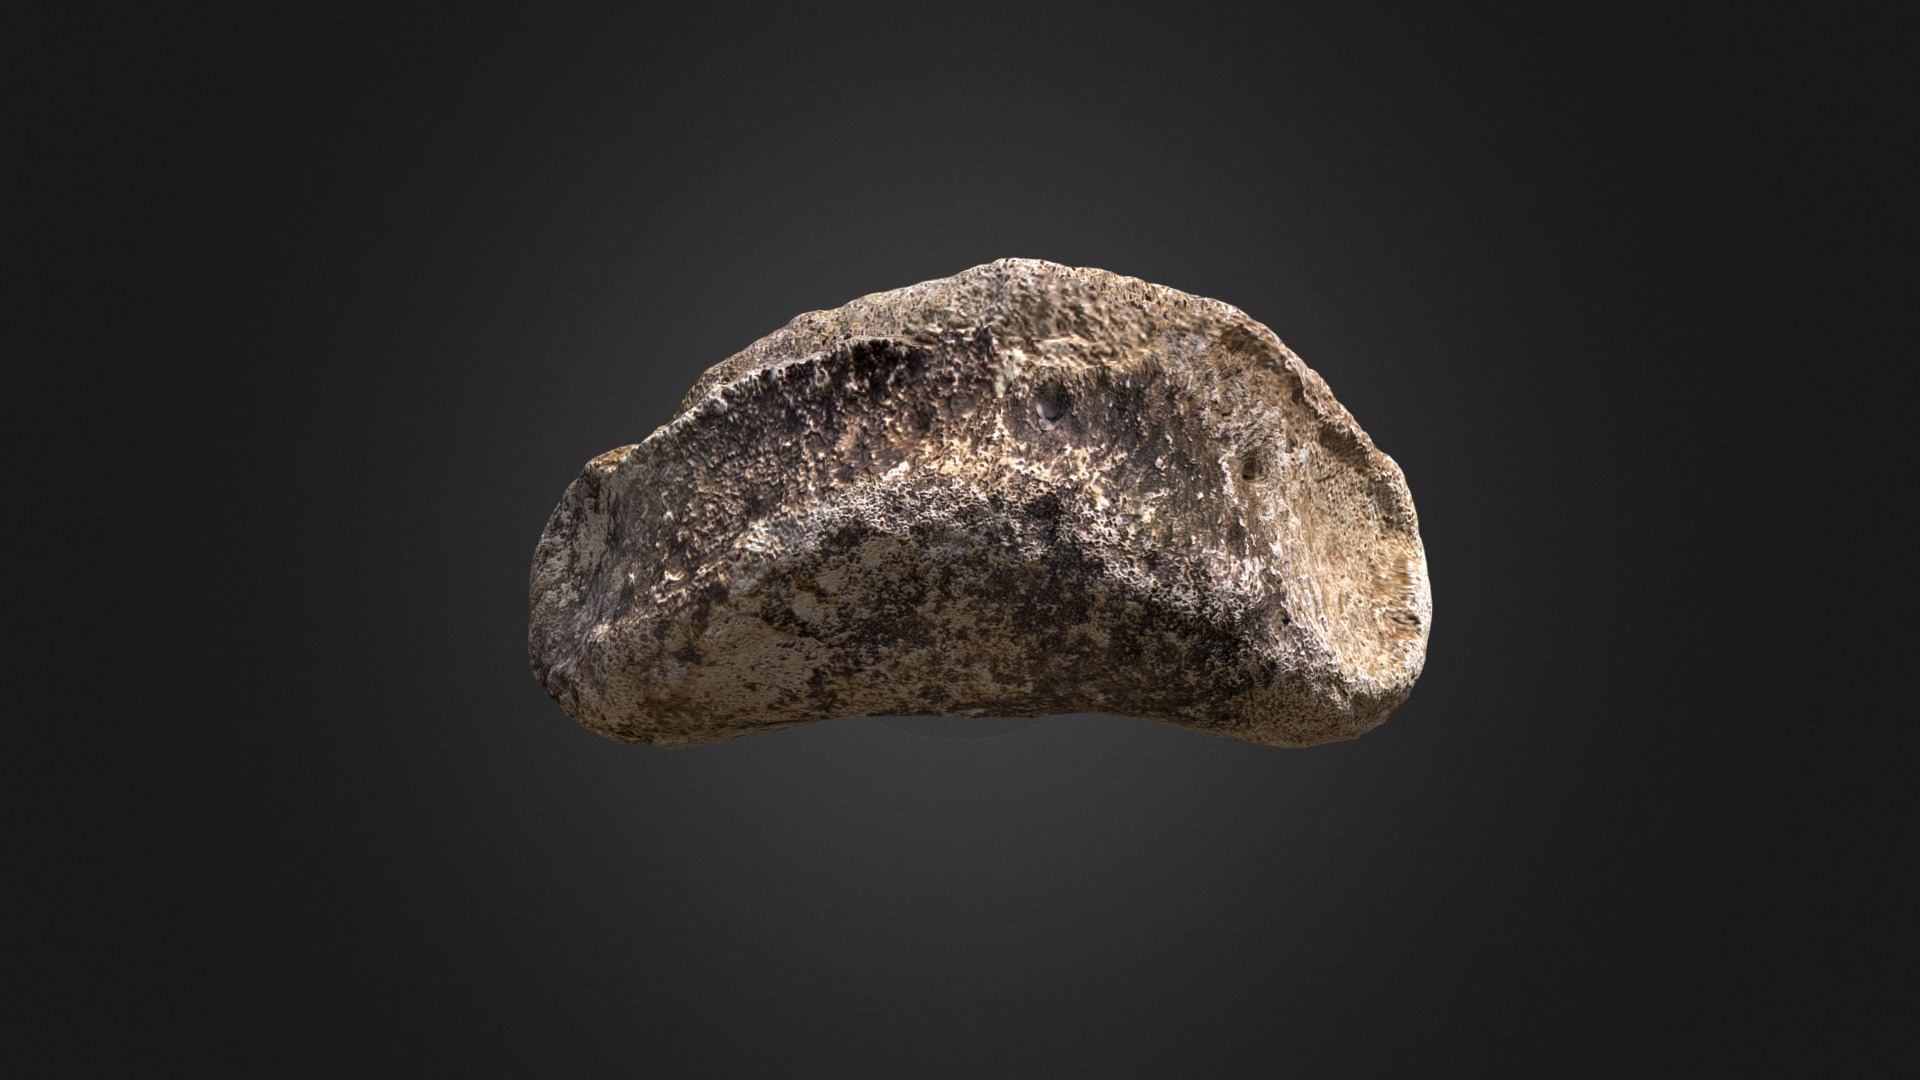 3D model Edmontosaurus Toe - This is a 3D model of the Edmontosaurus Toe. The 3D model is about a rock with a dark background.